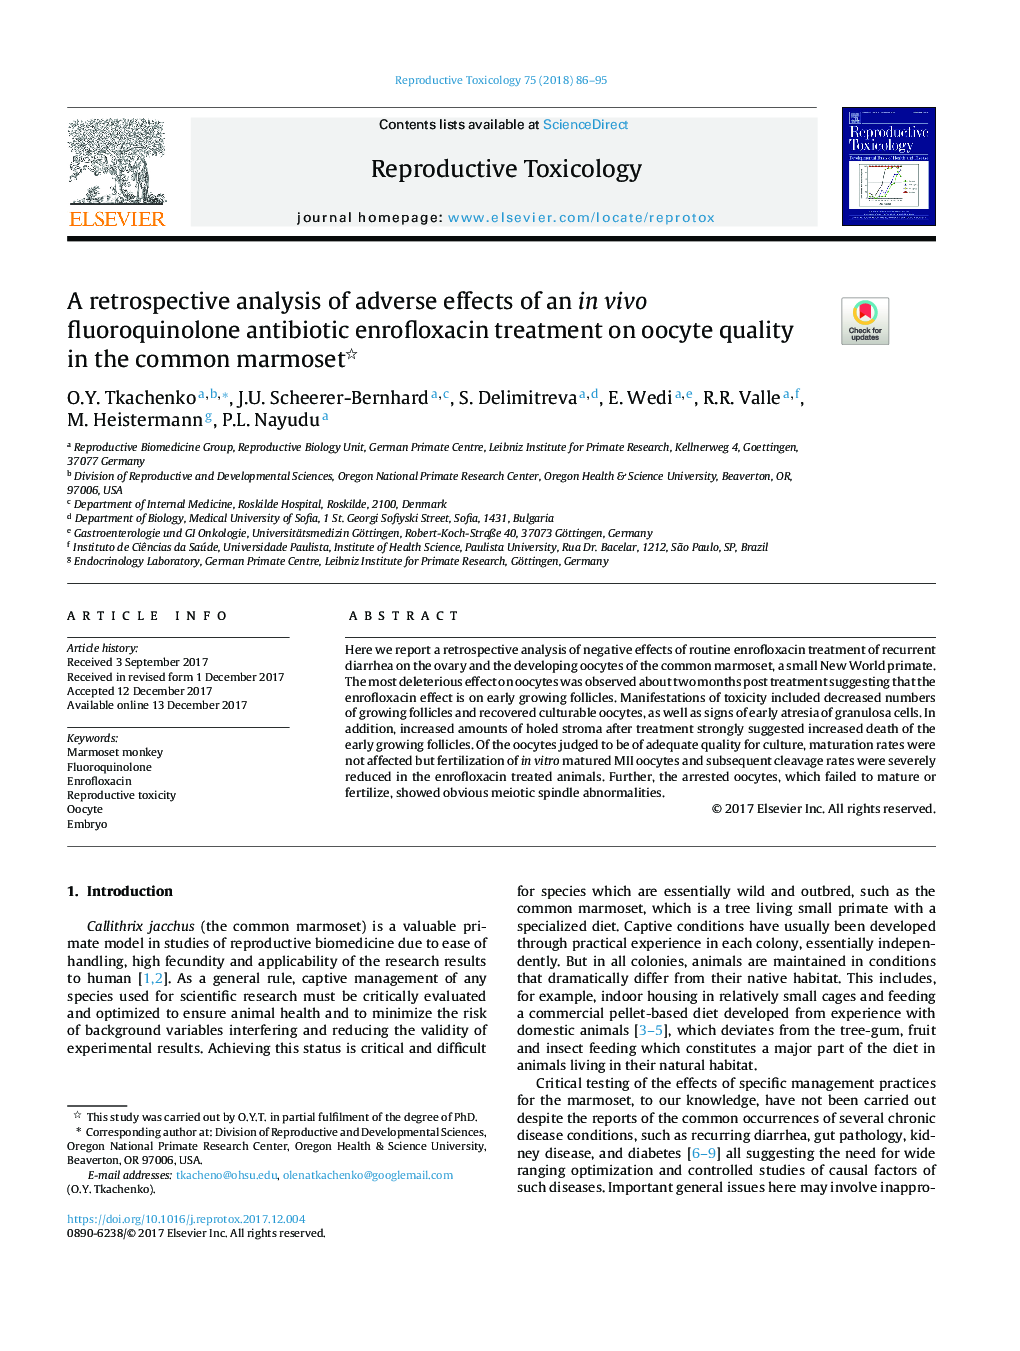 A retrospective analysis of adverse effects of an in vivo fluoroquinolone antibiotic enrofloxacin treatment on oocyte quality in the common marmoset